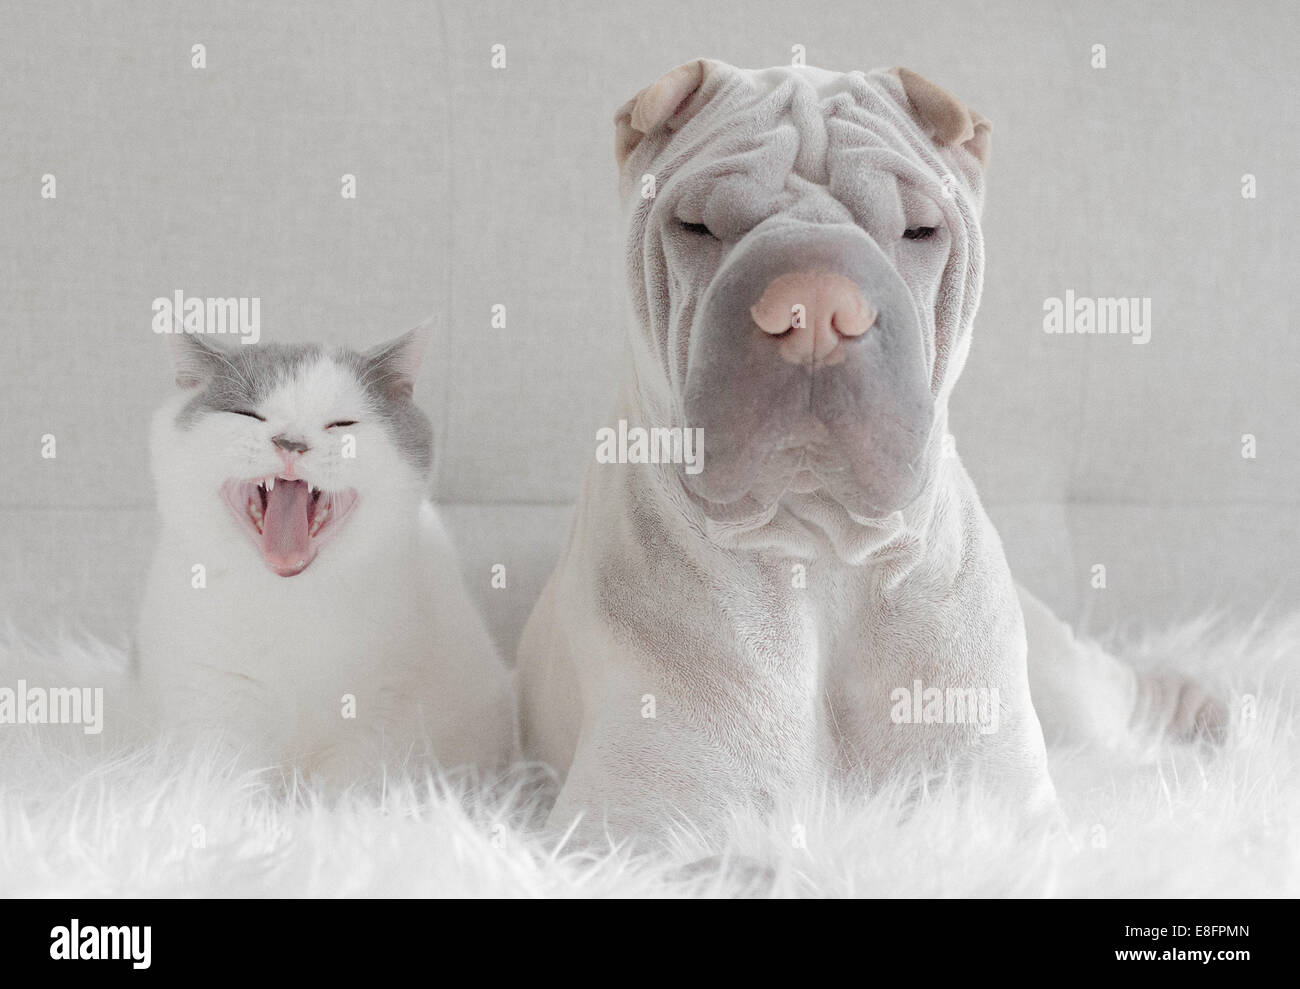 Shar pei dog and British shorthair cat sitting next to each other on a rug Stock Photo